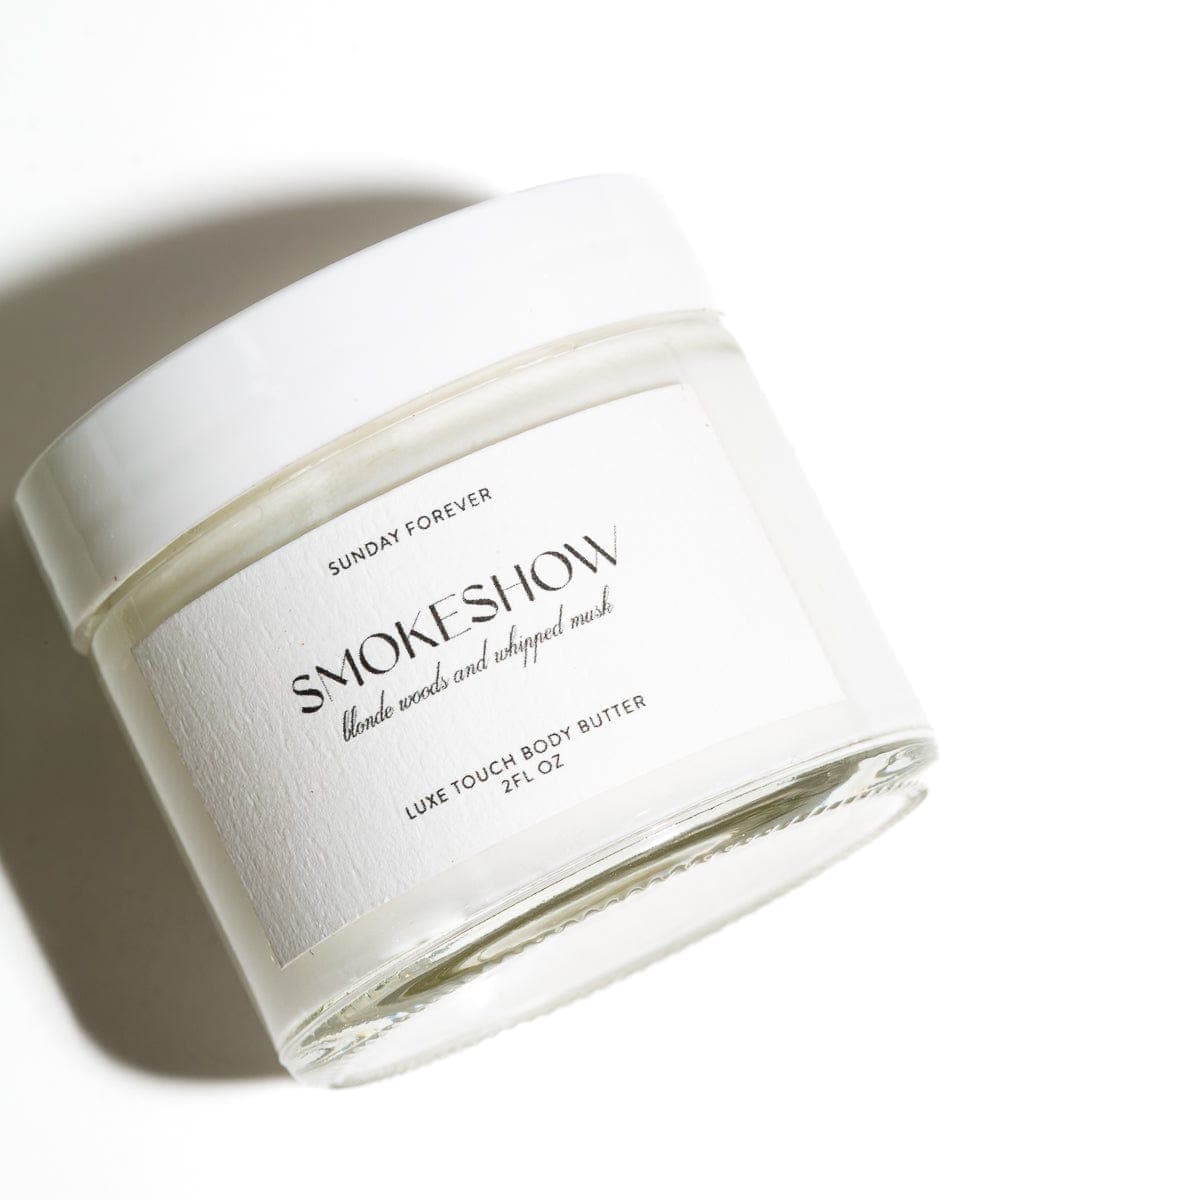 New! Luxe Touch Smokeshow Body Butter - FRAGRANCE-Sunday Forever